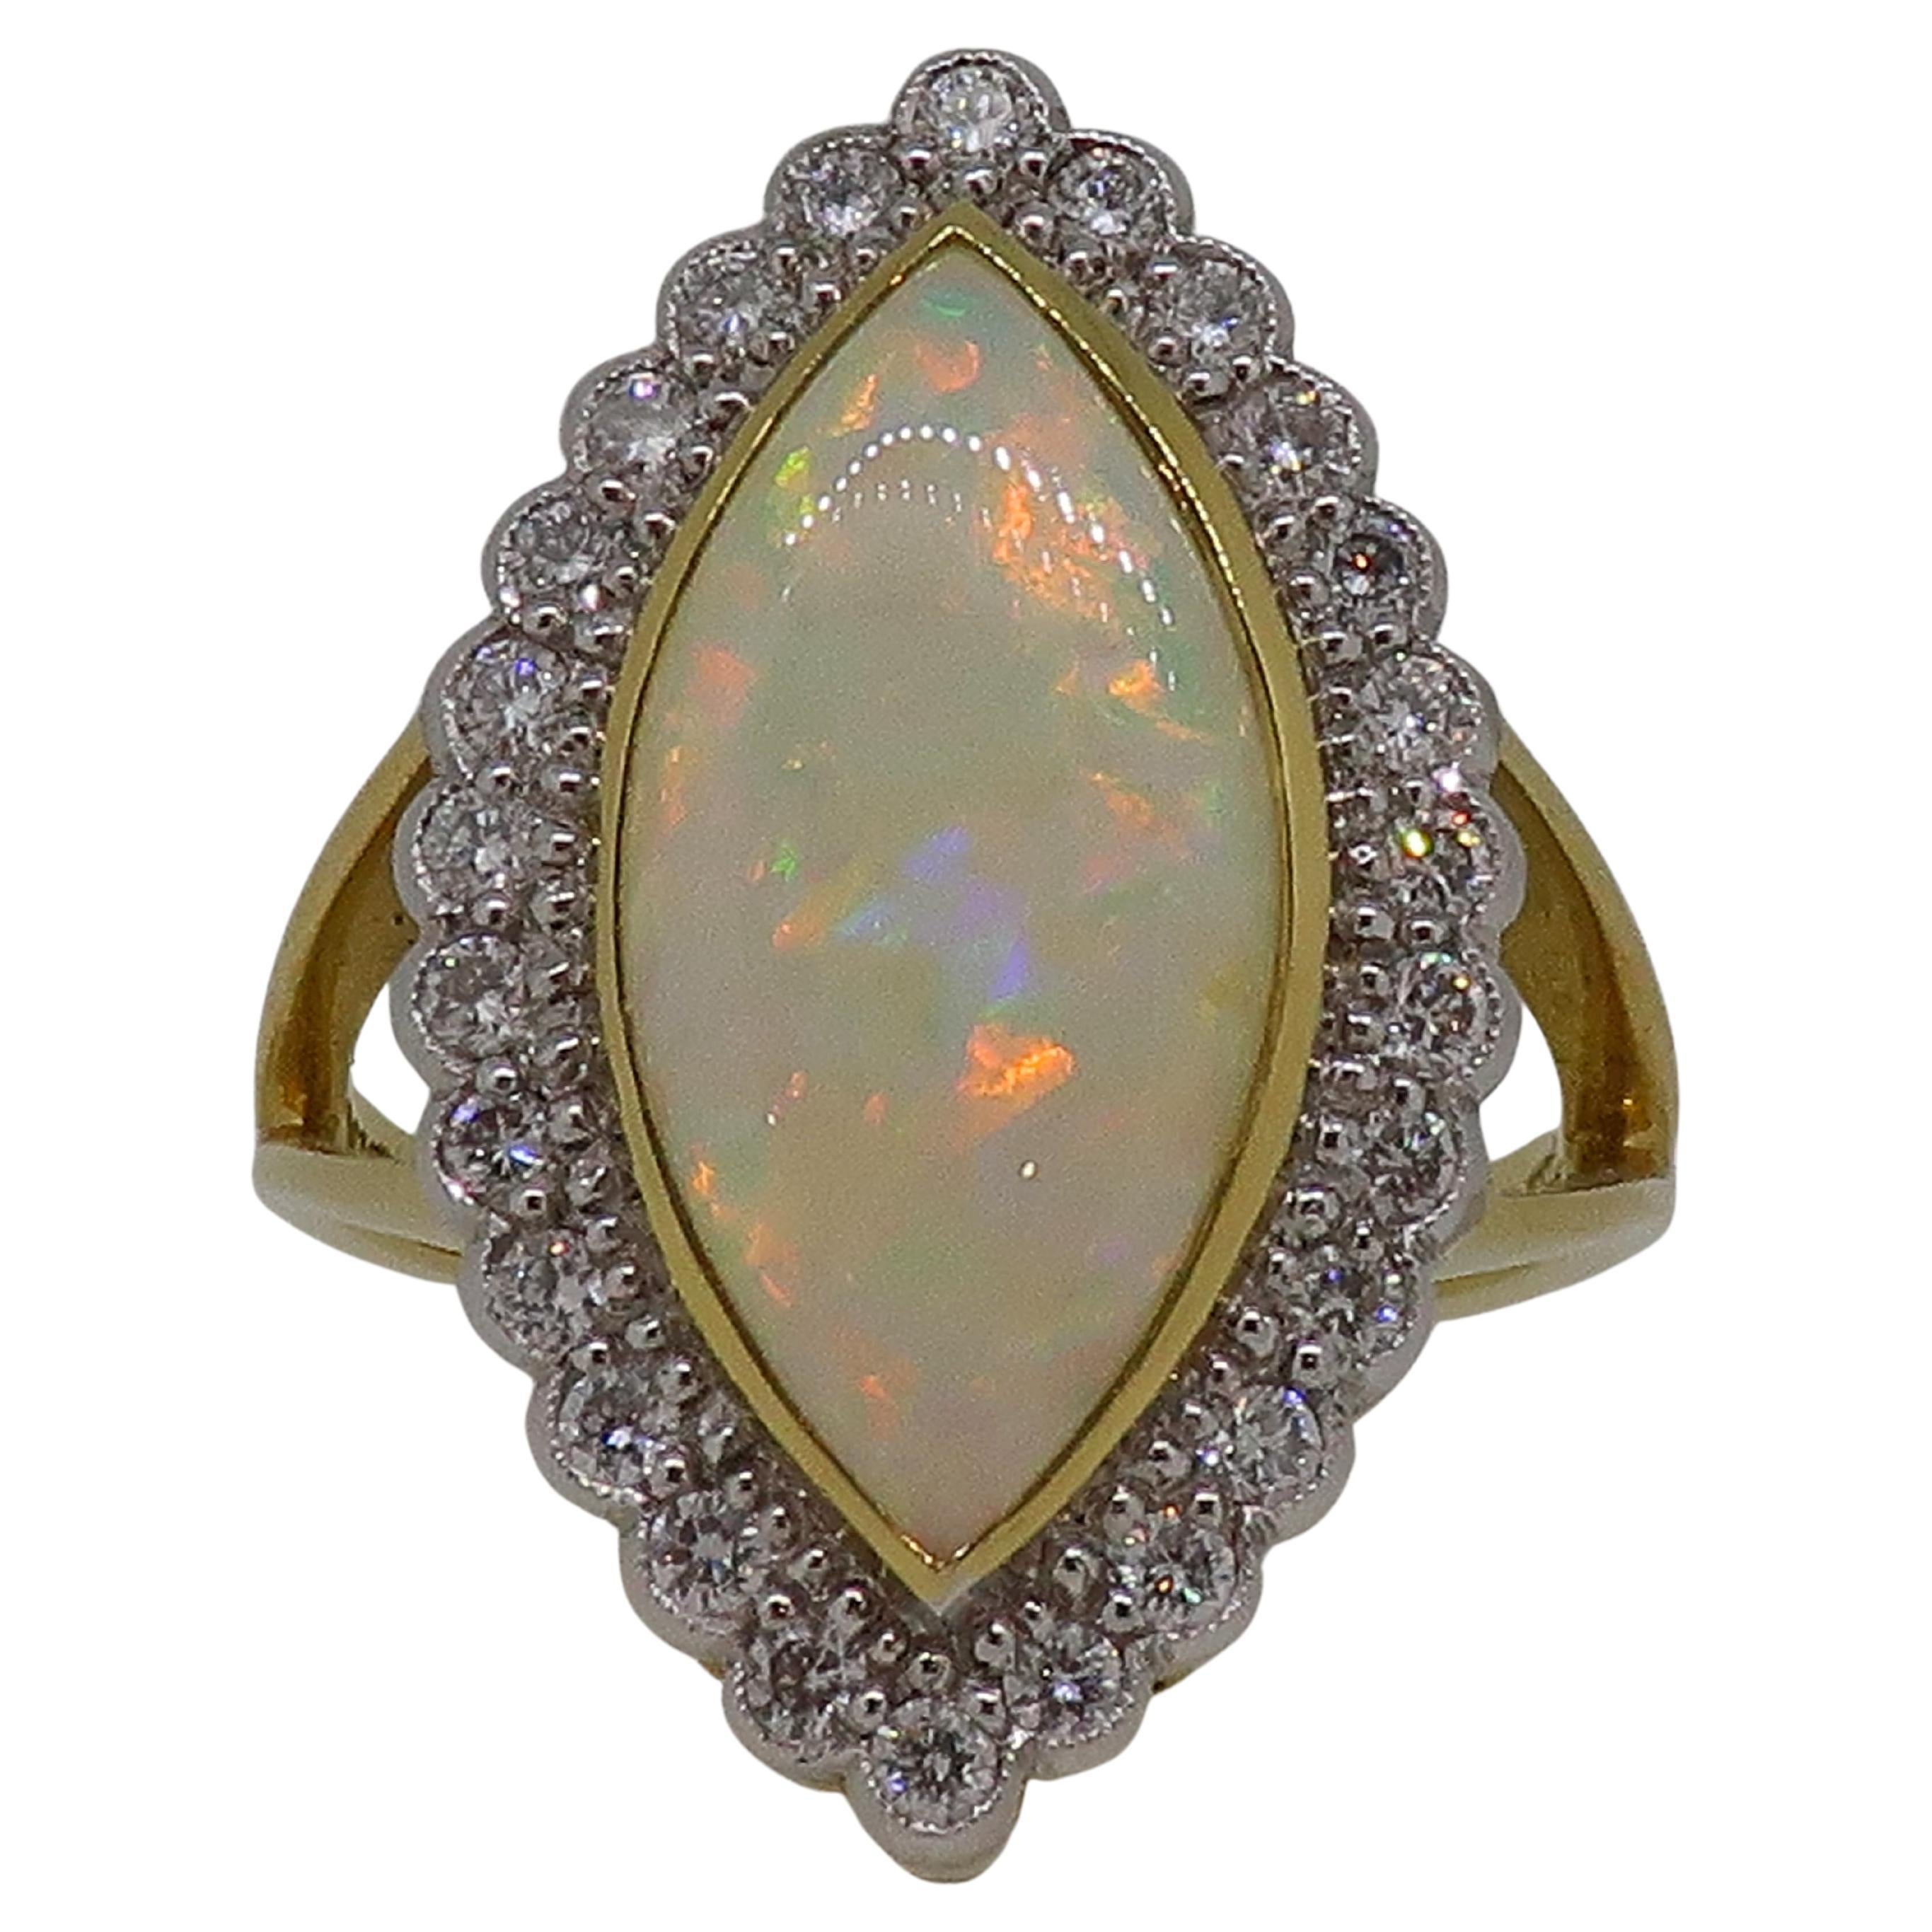 Marquise Opal and Diamond Cluster Ring 18 Karat Yellow and White Gold

Stunning and stand out marquise opal and diamond cluster ring. Large marquise opal measuring 19.5mm x 9mm, encased in a fine 18ct yellow gold bezel. The colourful opal is